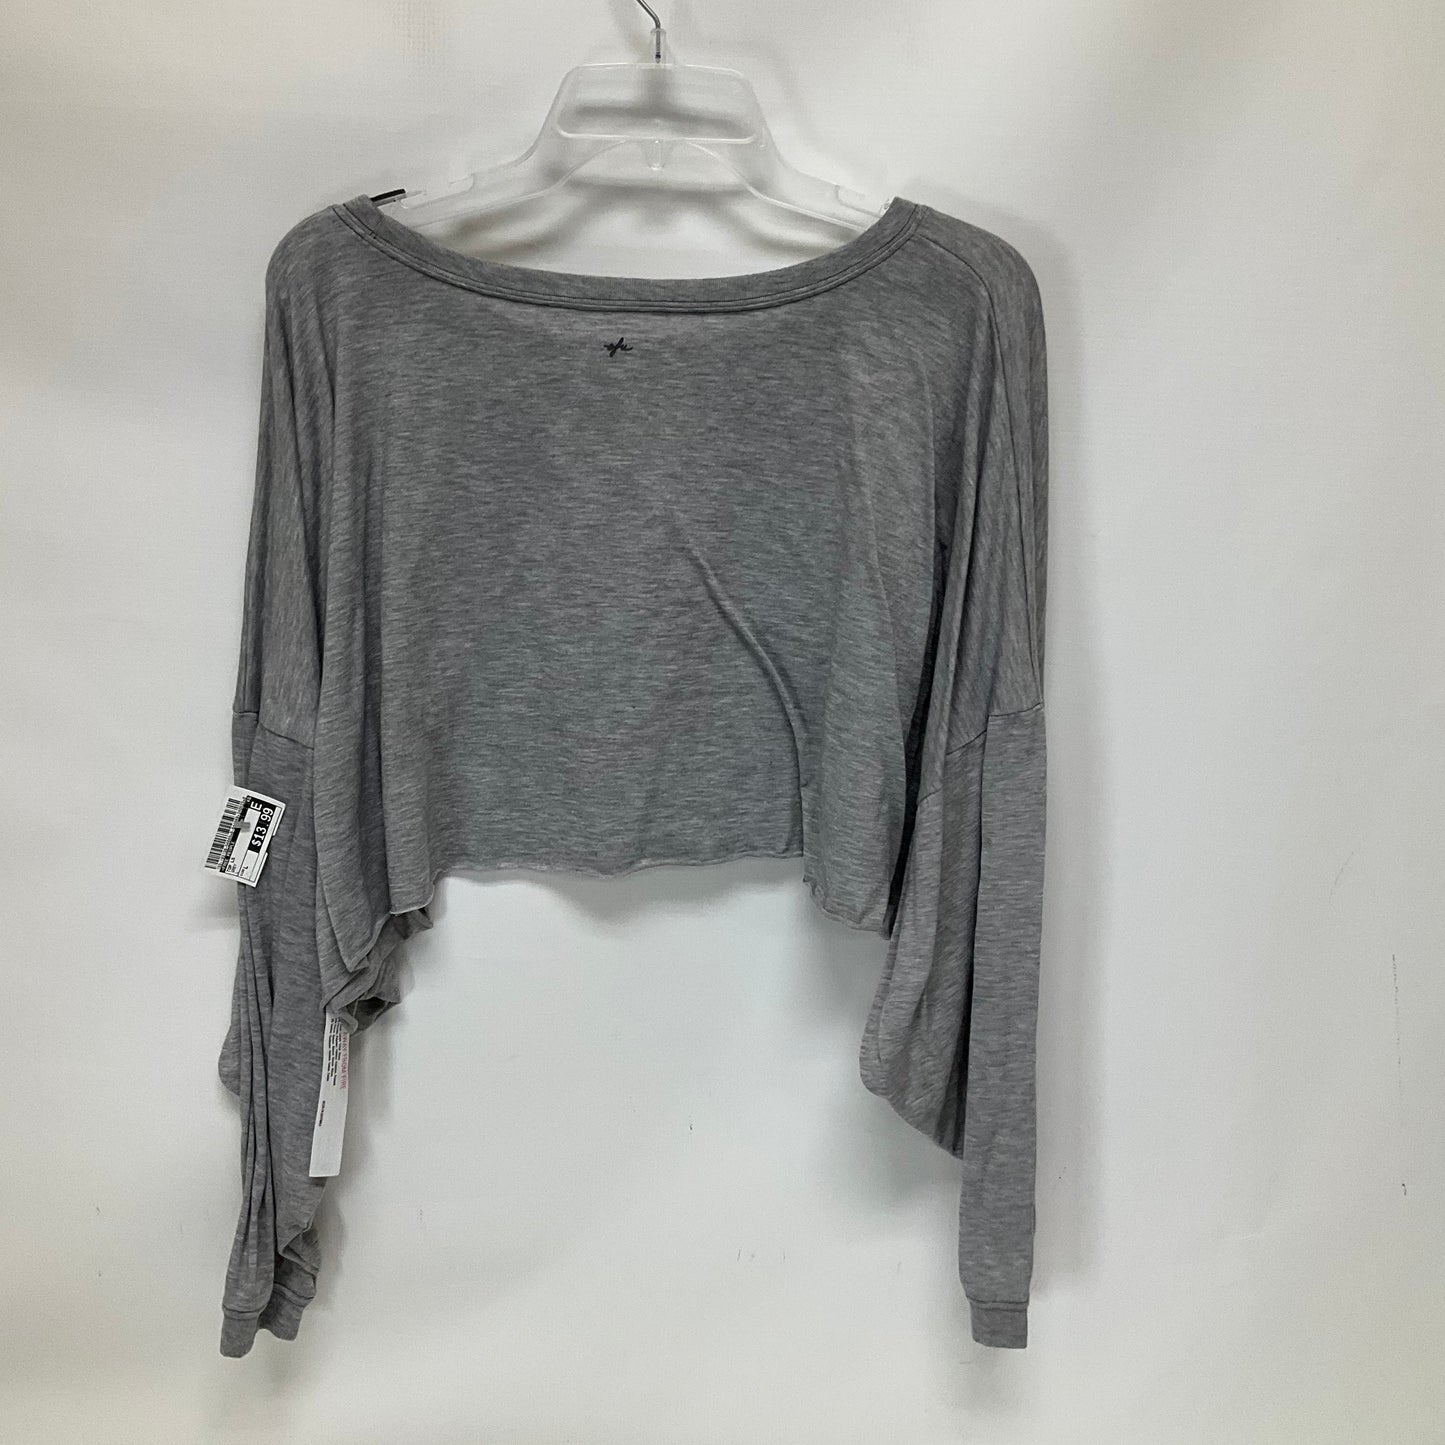 Grey Top Long Sleeve Urban Outfitters, Size L